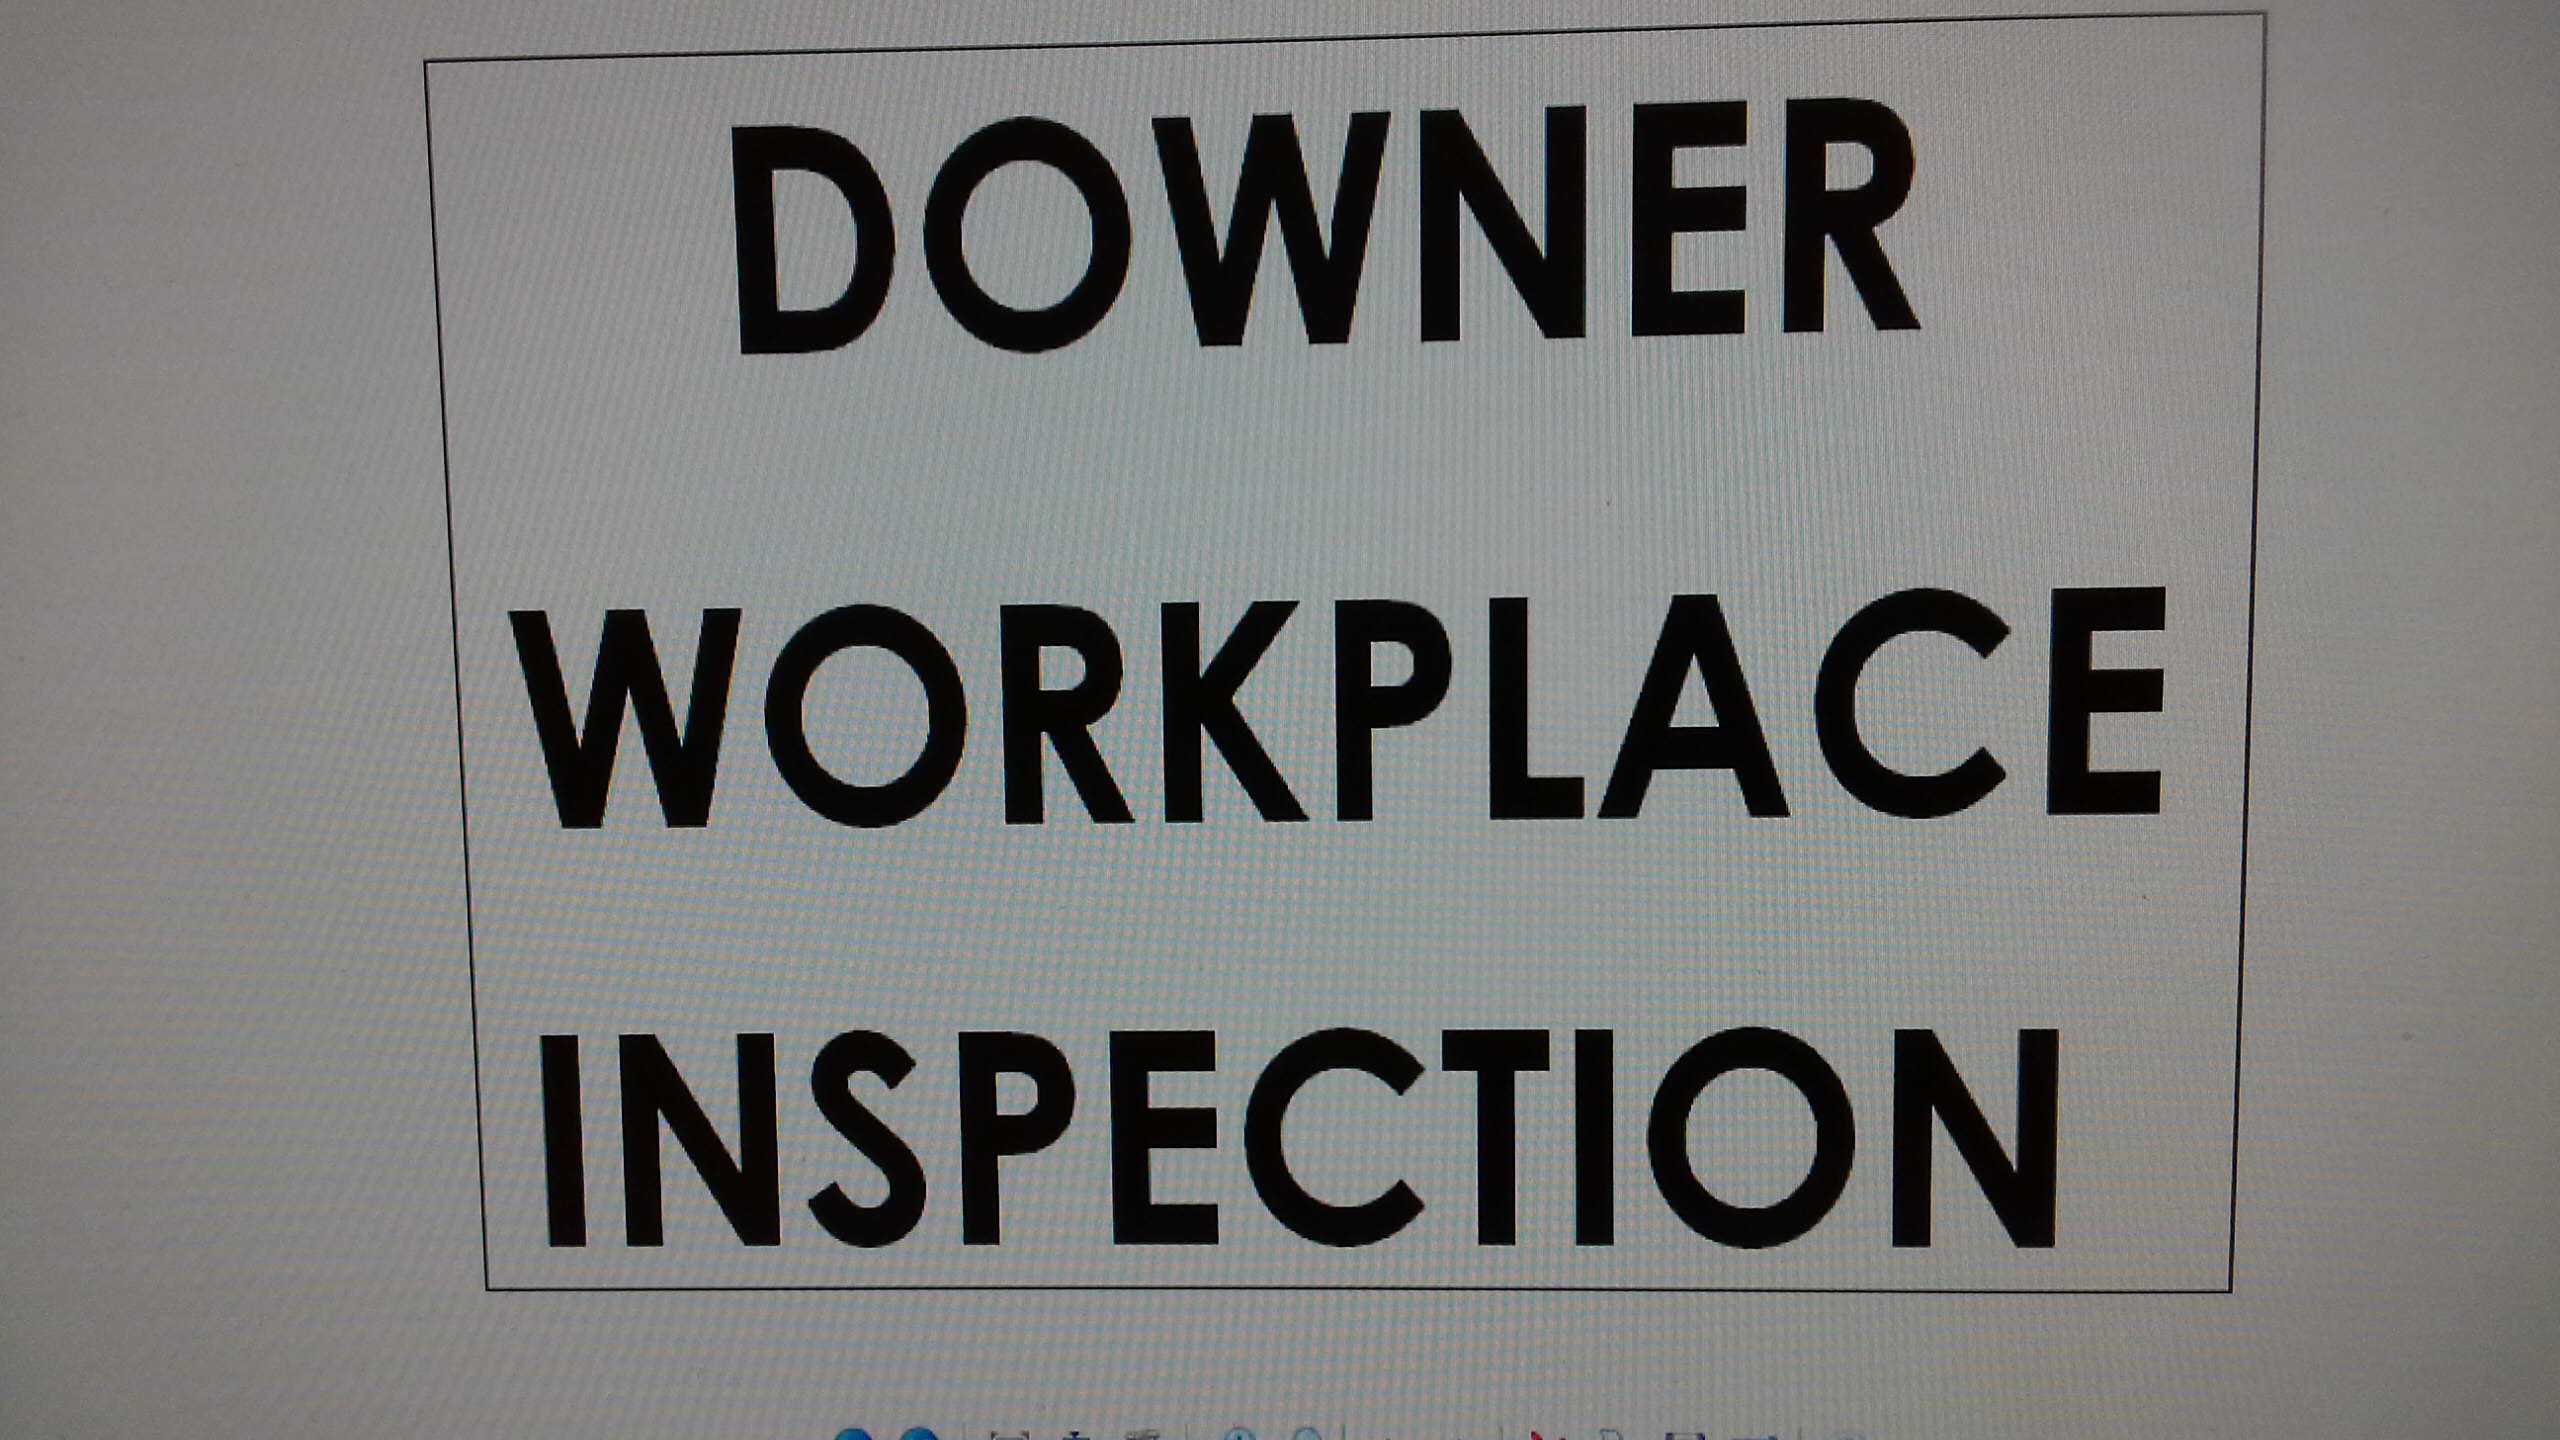  Workplace Inspection